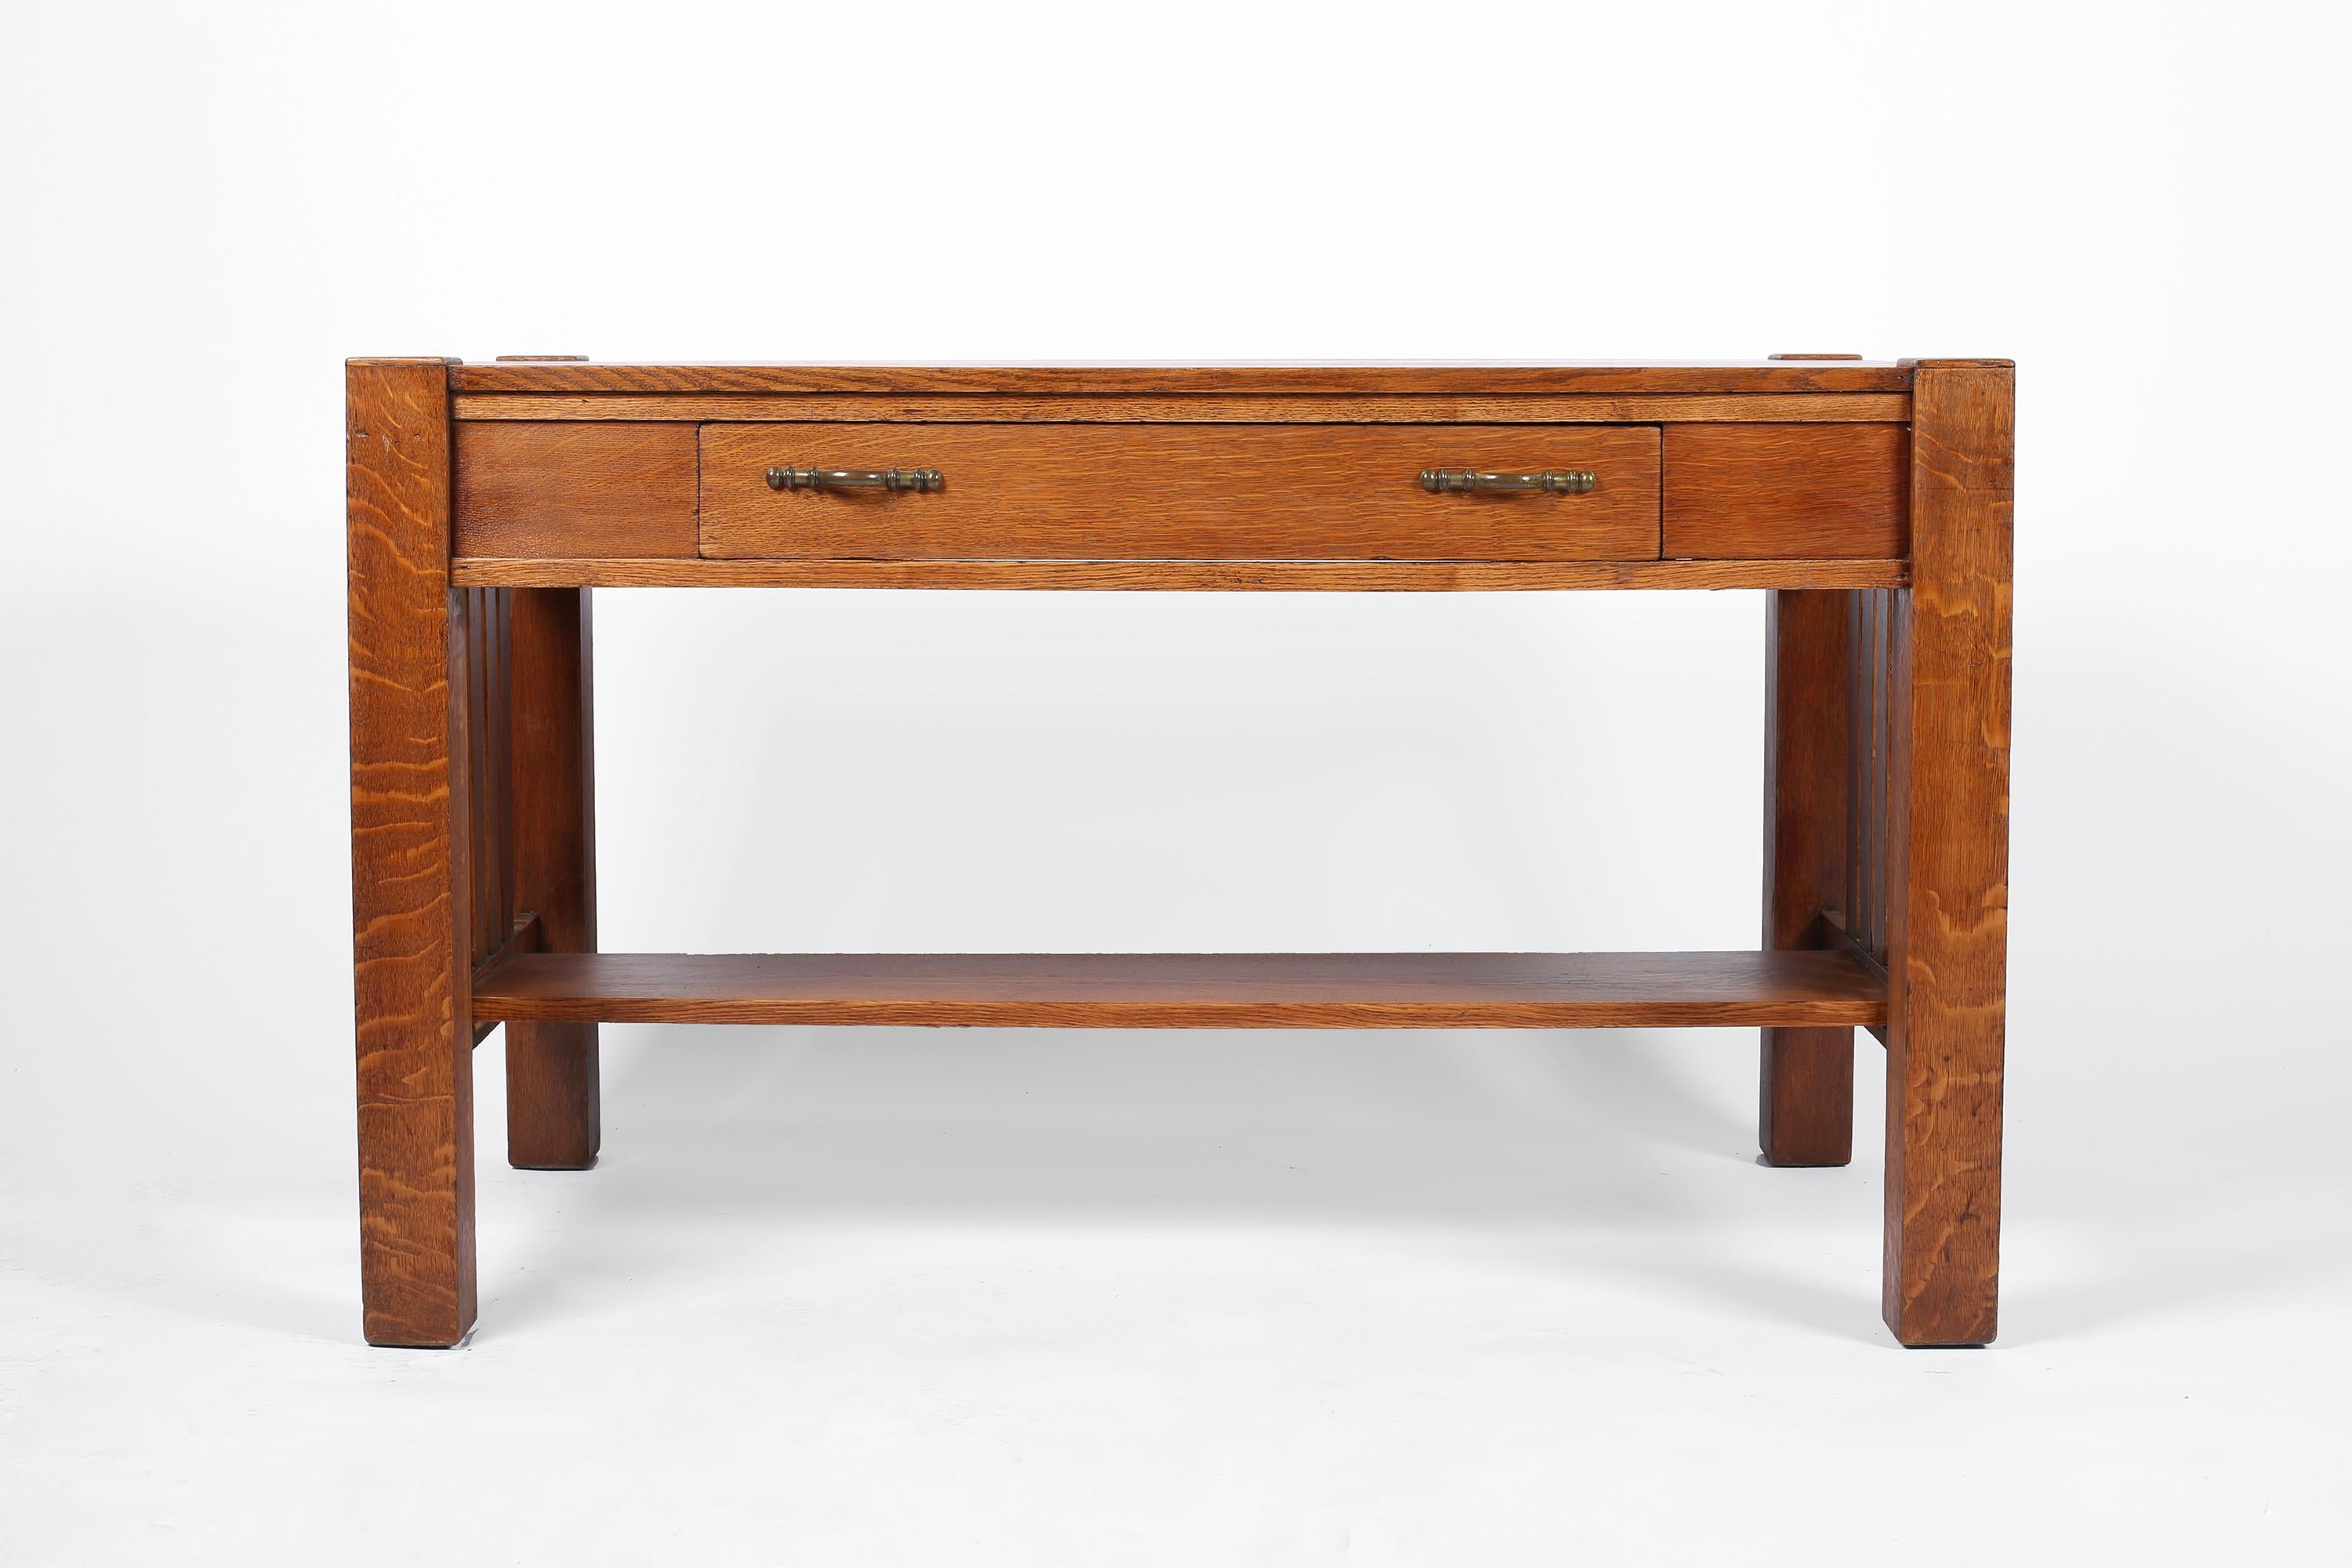 A fine solid oak Arts & Crafts desk in the manner of Frank Lloyd Wright. Featuring a planked top with cubic, column-esque legs and slatted side detailing. The brass drawer pulls a later, but more than suitable, replacement for the originals. Honeoye